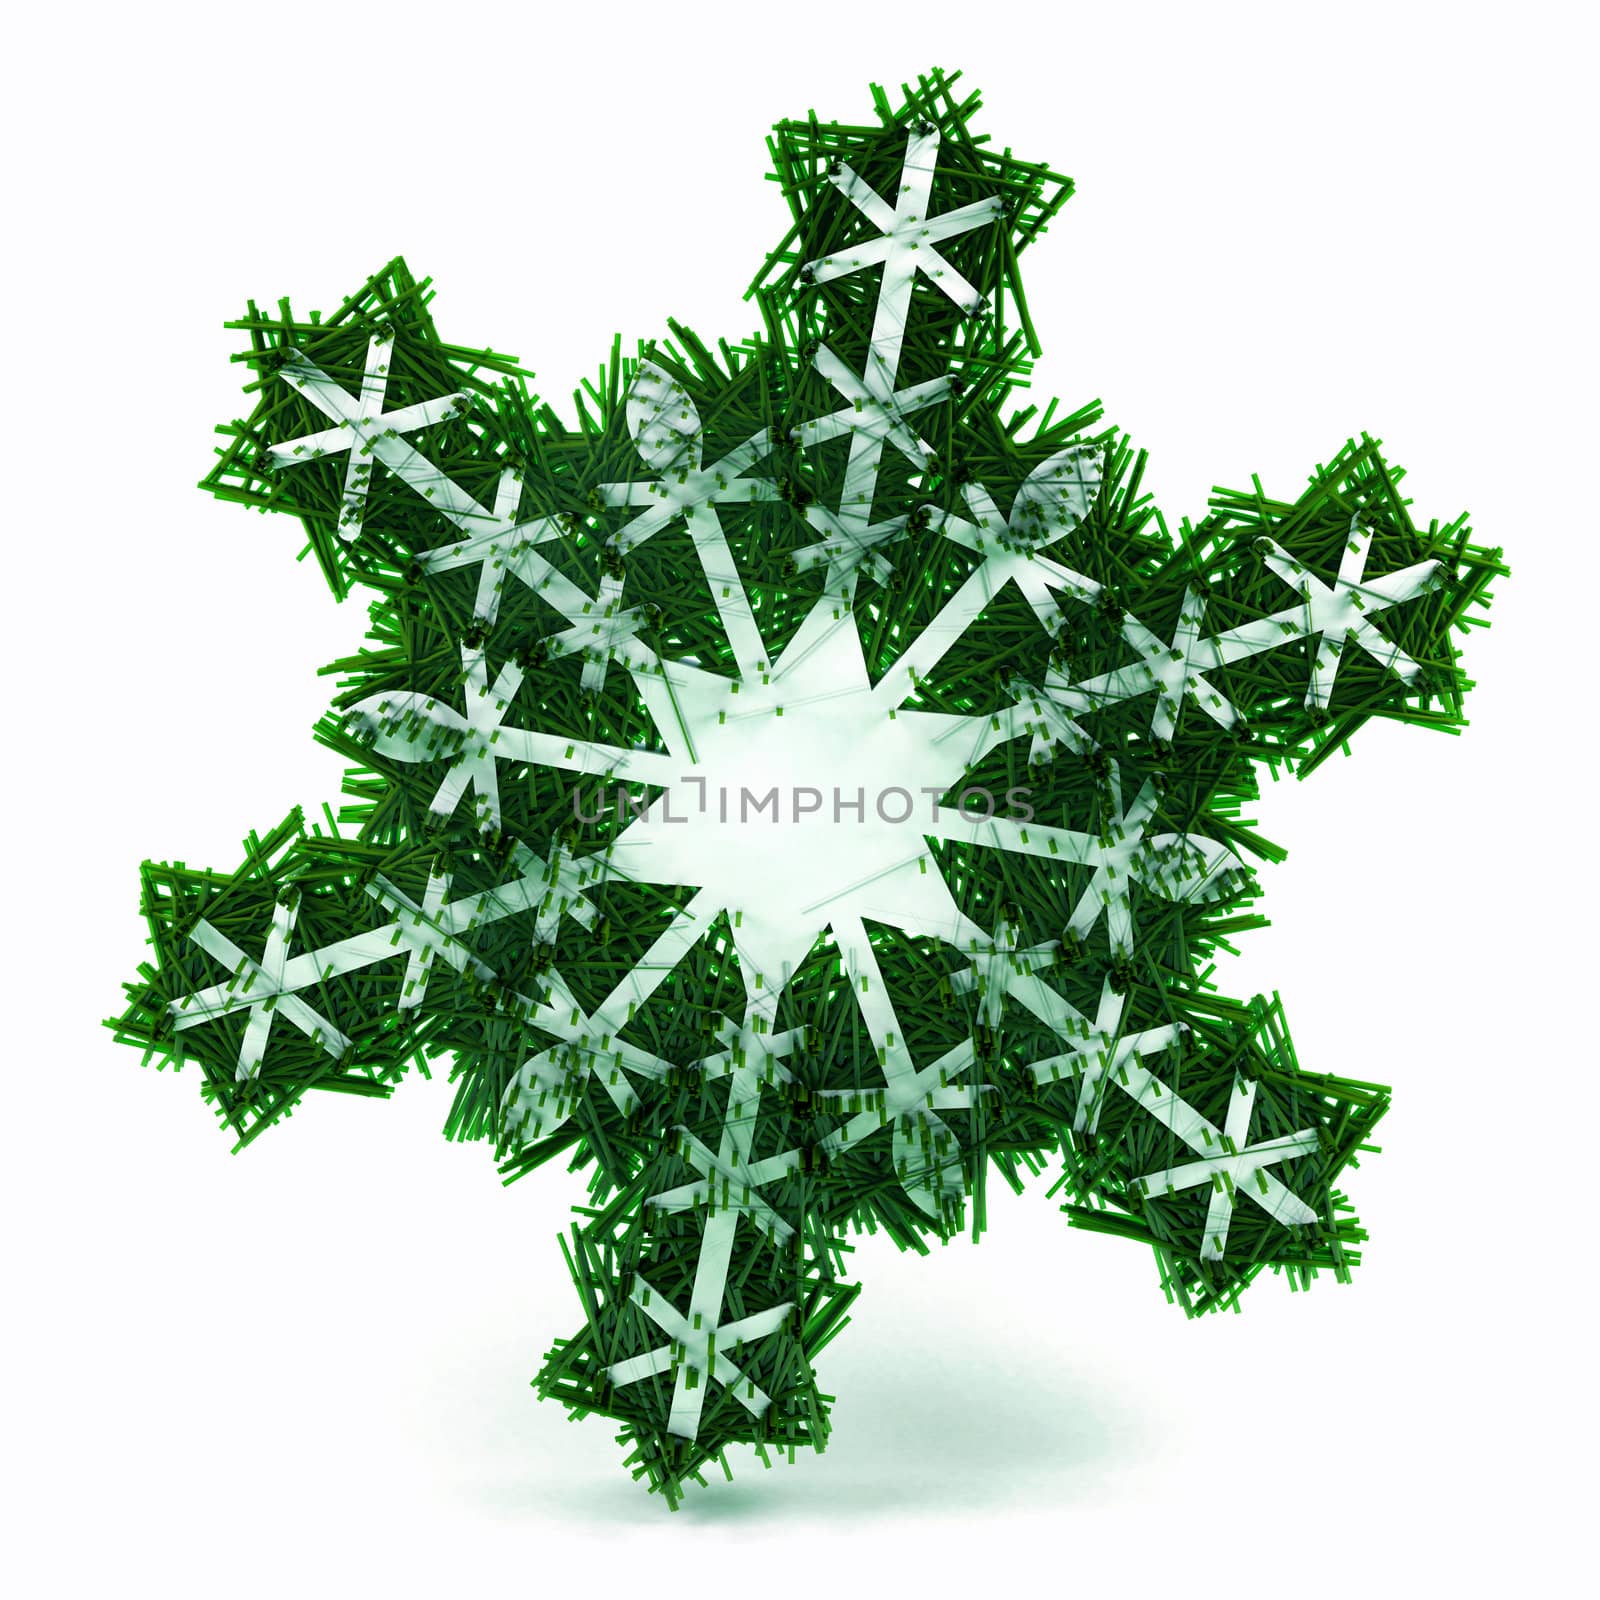 Snowflake. This image contains clipping path for easy background removing.